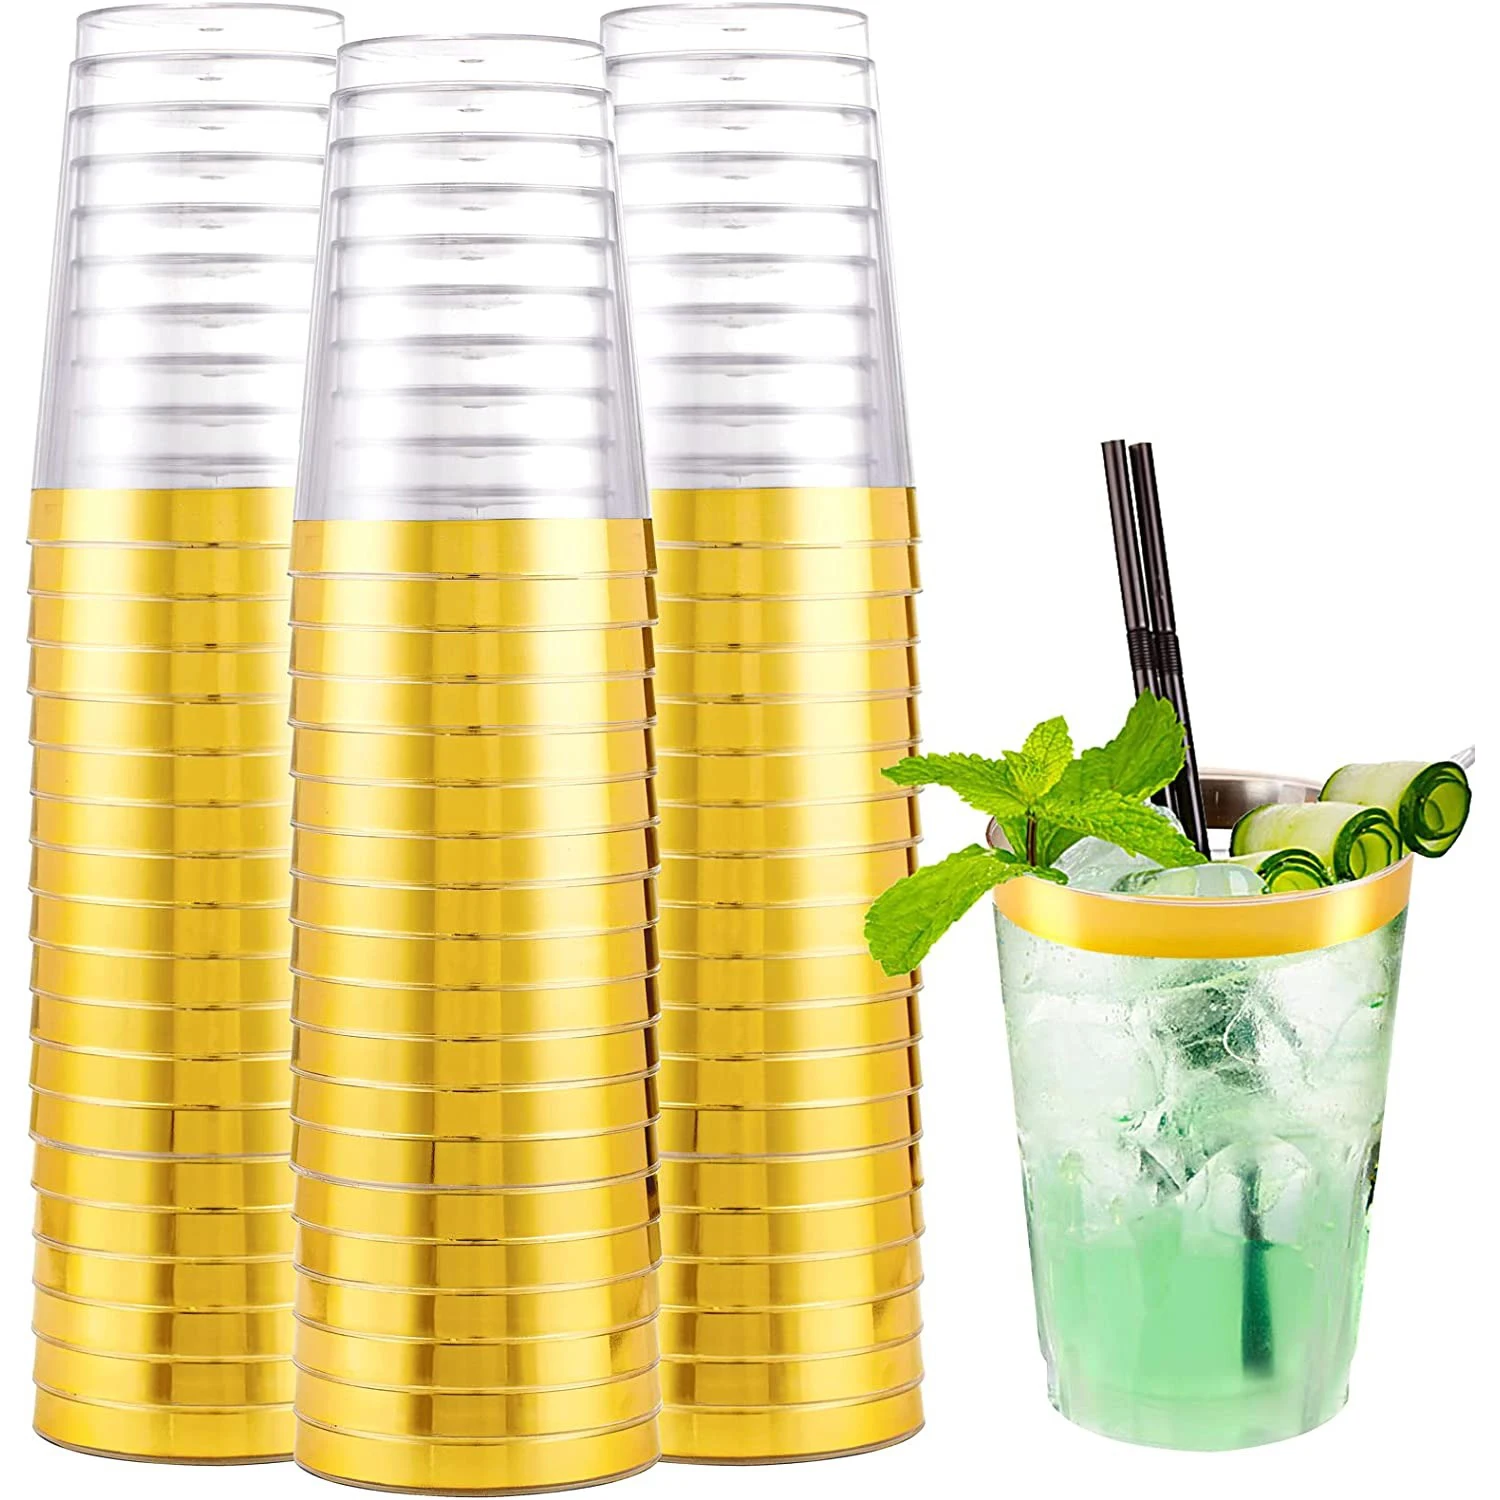 100pcs Gold Plastic Cups, 10 oz Fancy Crystal Clear Plastic Tumblers Gold Rim Cups Hard Wedding Cups Disposable Party Cups